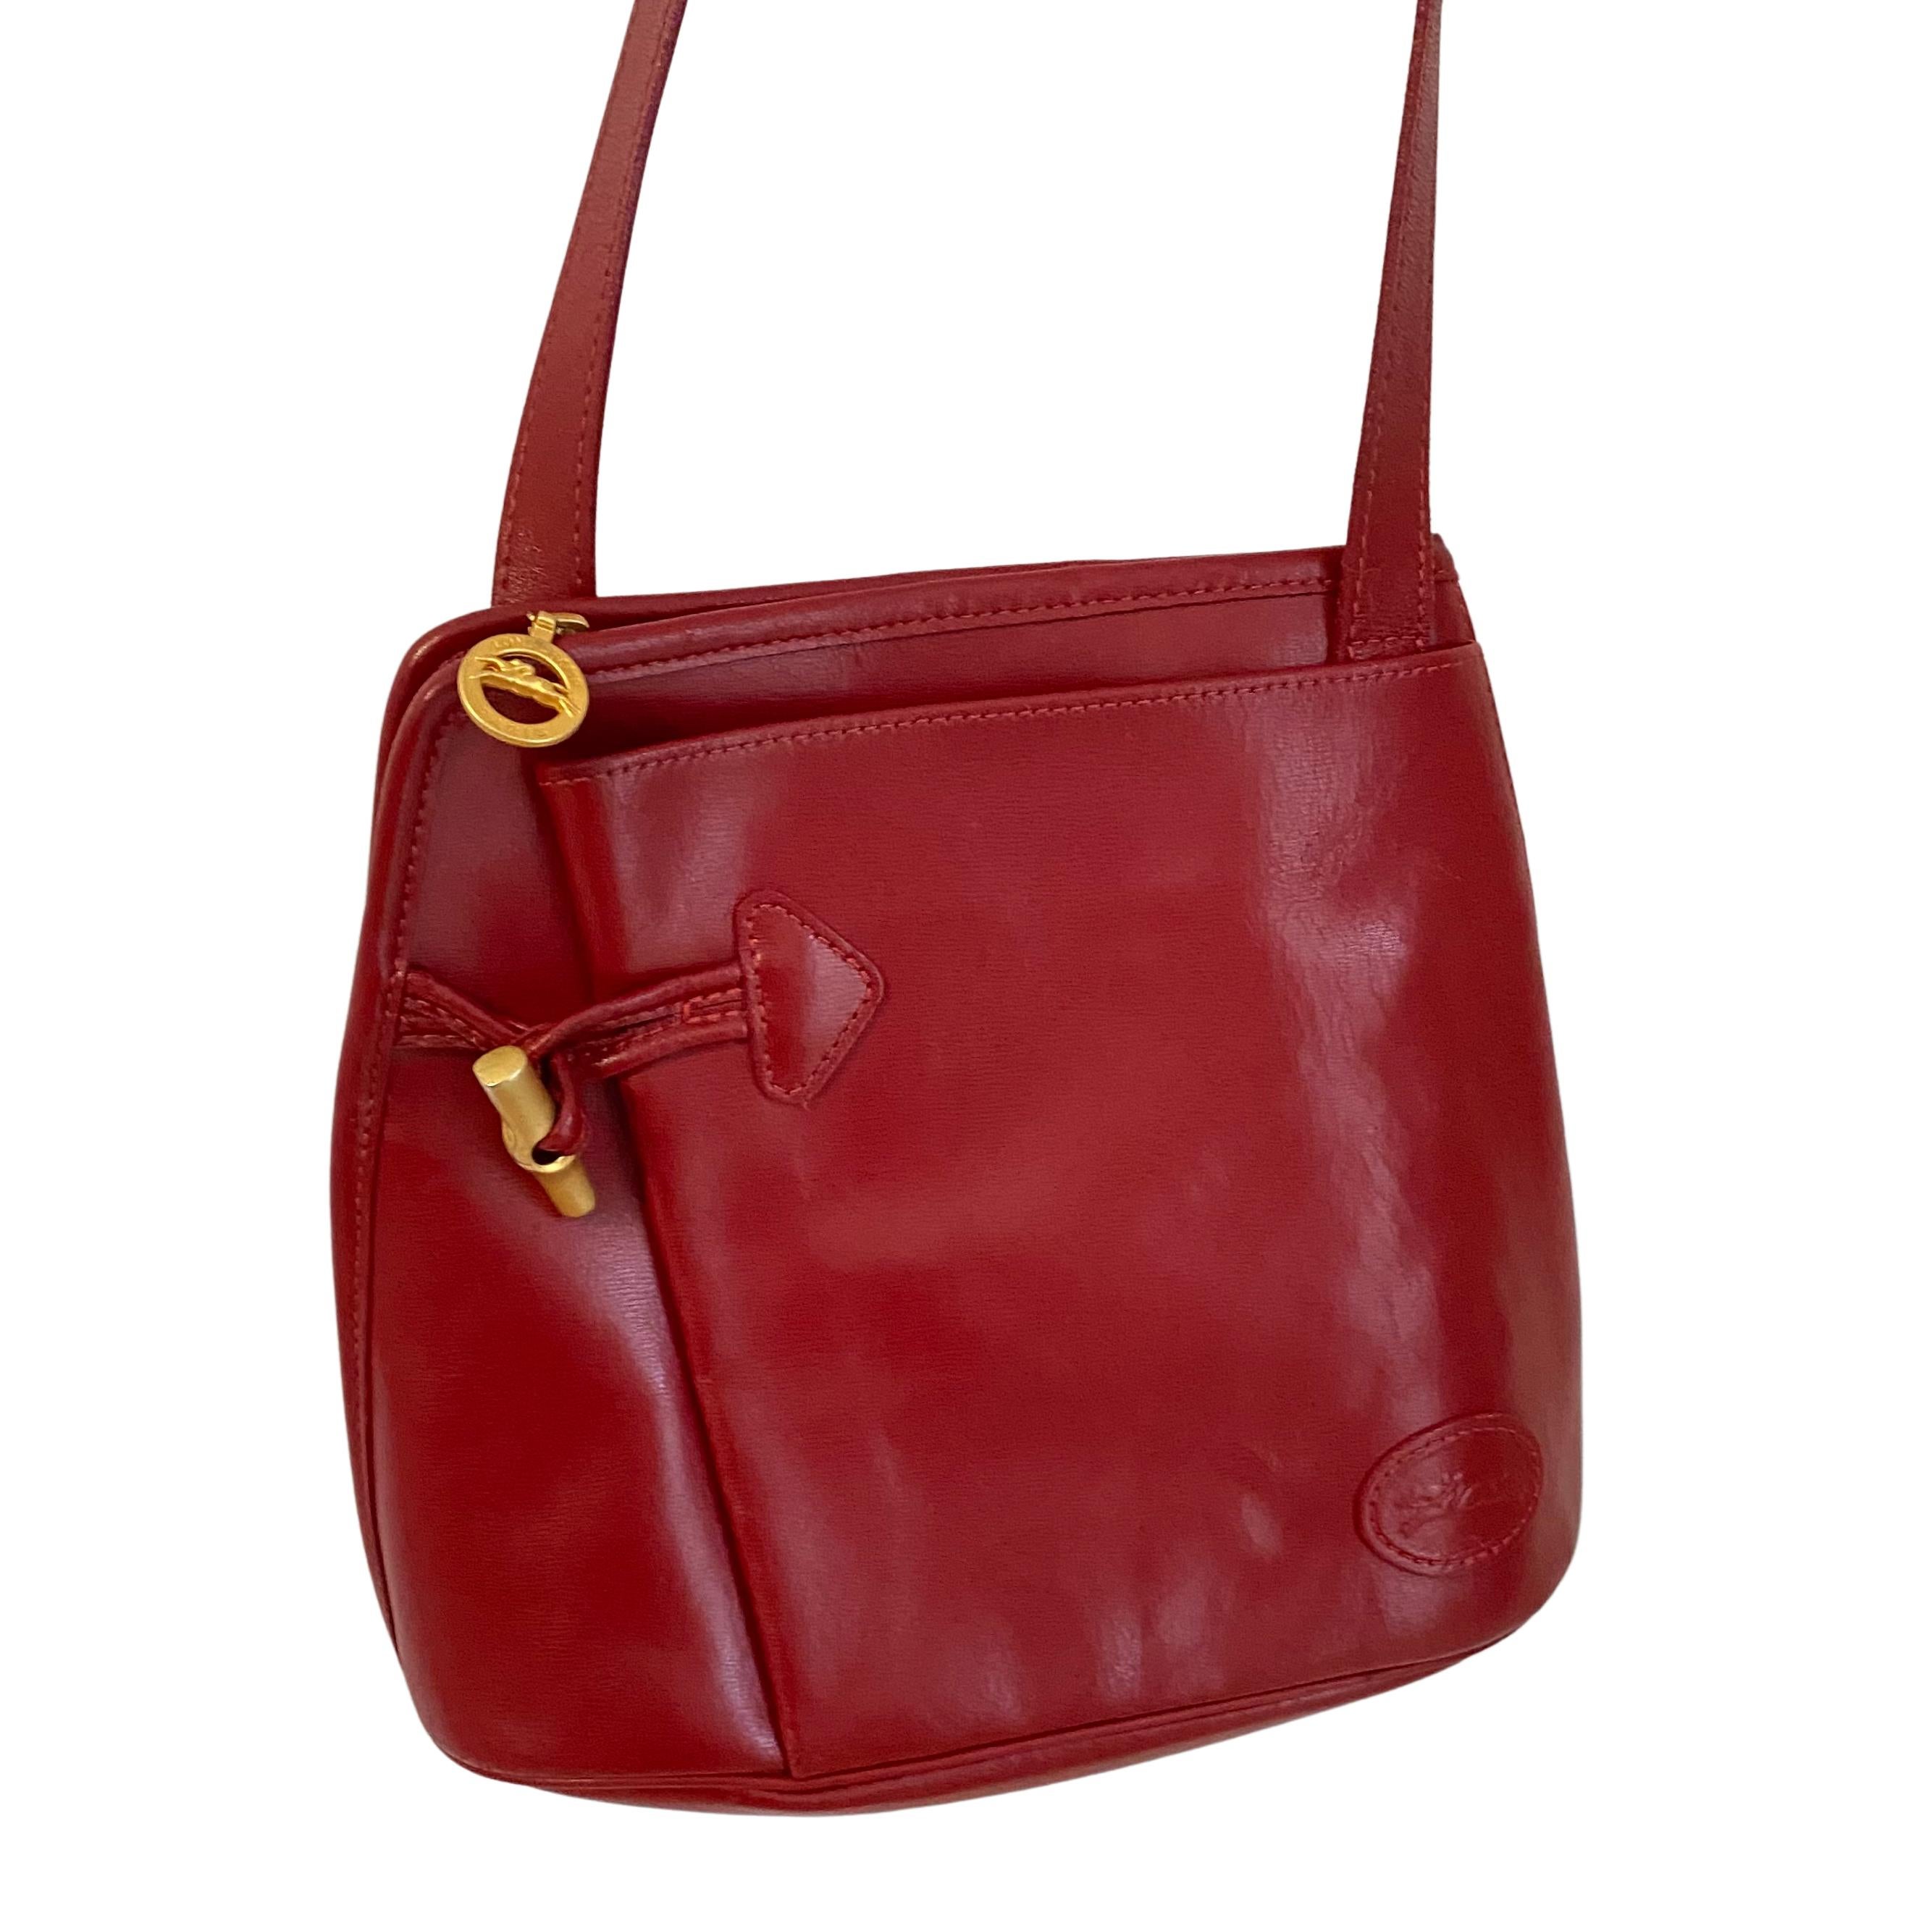 Lipstick red leather Longchamp Paris crossbody bag from France.
Foldover design. 
Zip closing. Gold Longchamp zipper pull and embossed logo on the front.
Approximately 9